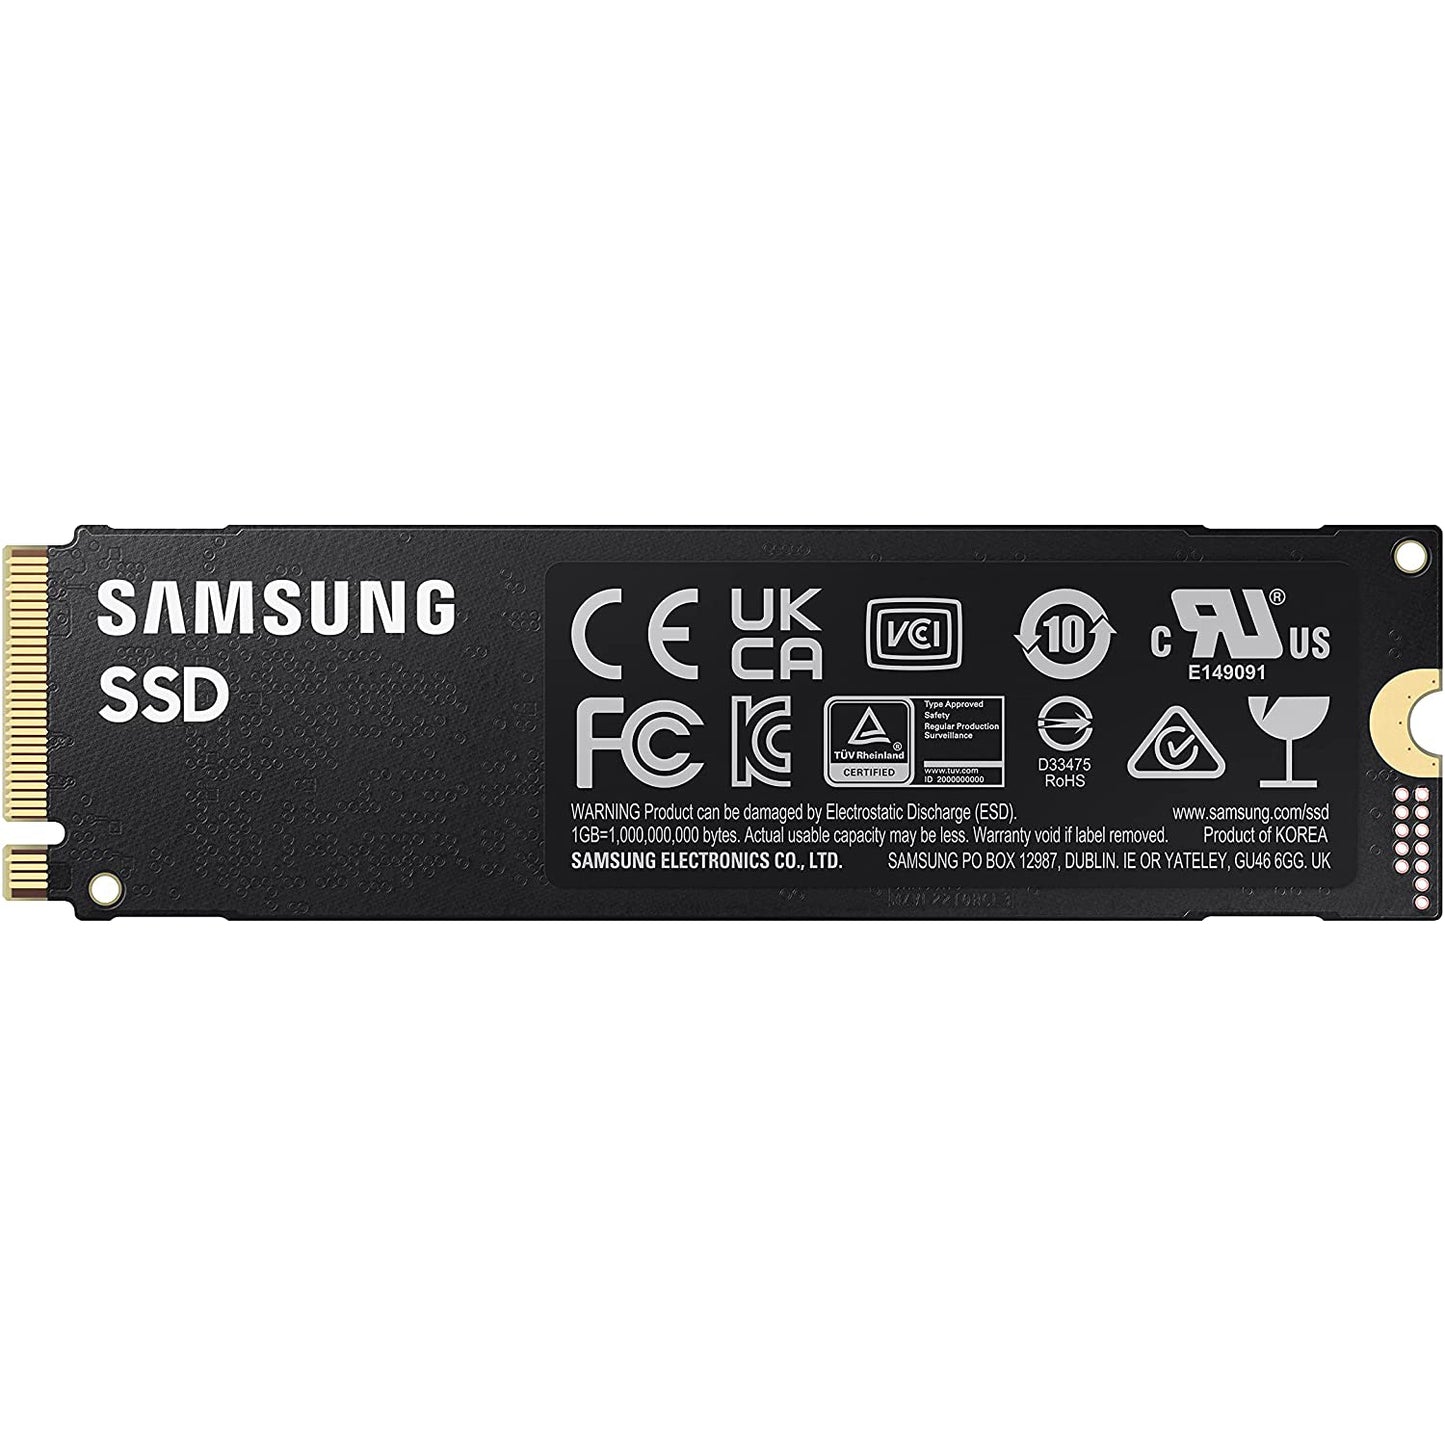 Samsung 980 PRO 500GB M.2 PCIe 4.0 NVMe SSD/Solid State Drive 6900MB/s Read, 5000MB/s Write